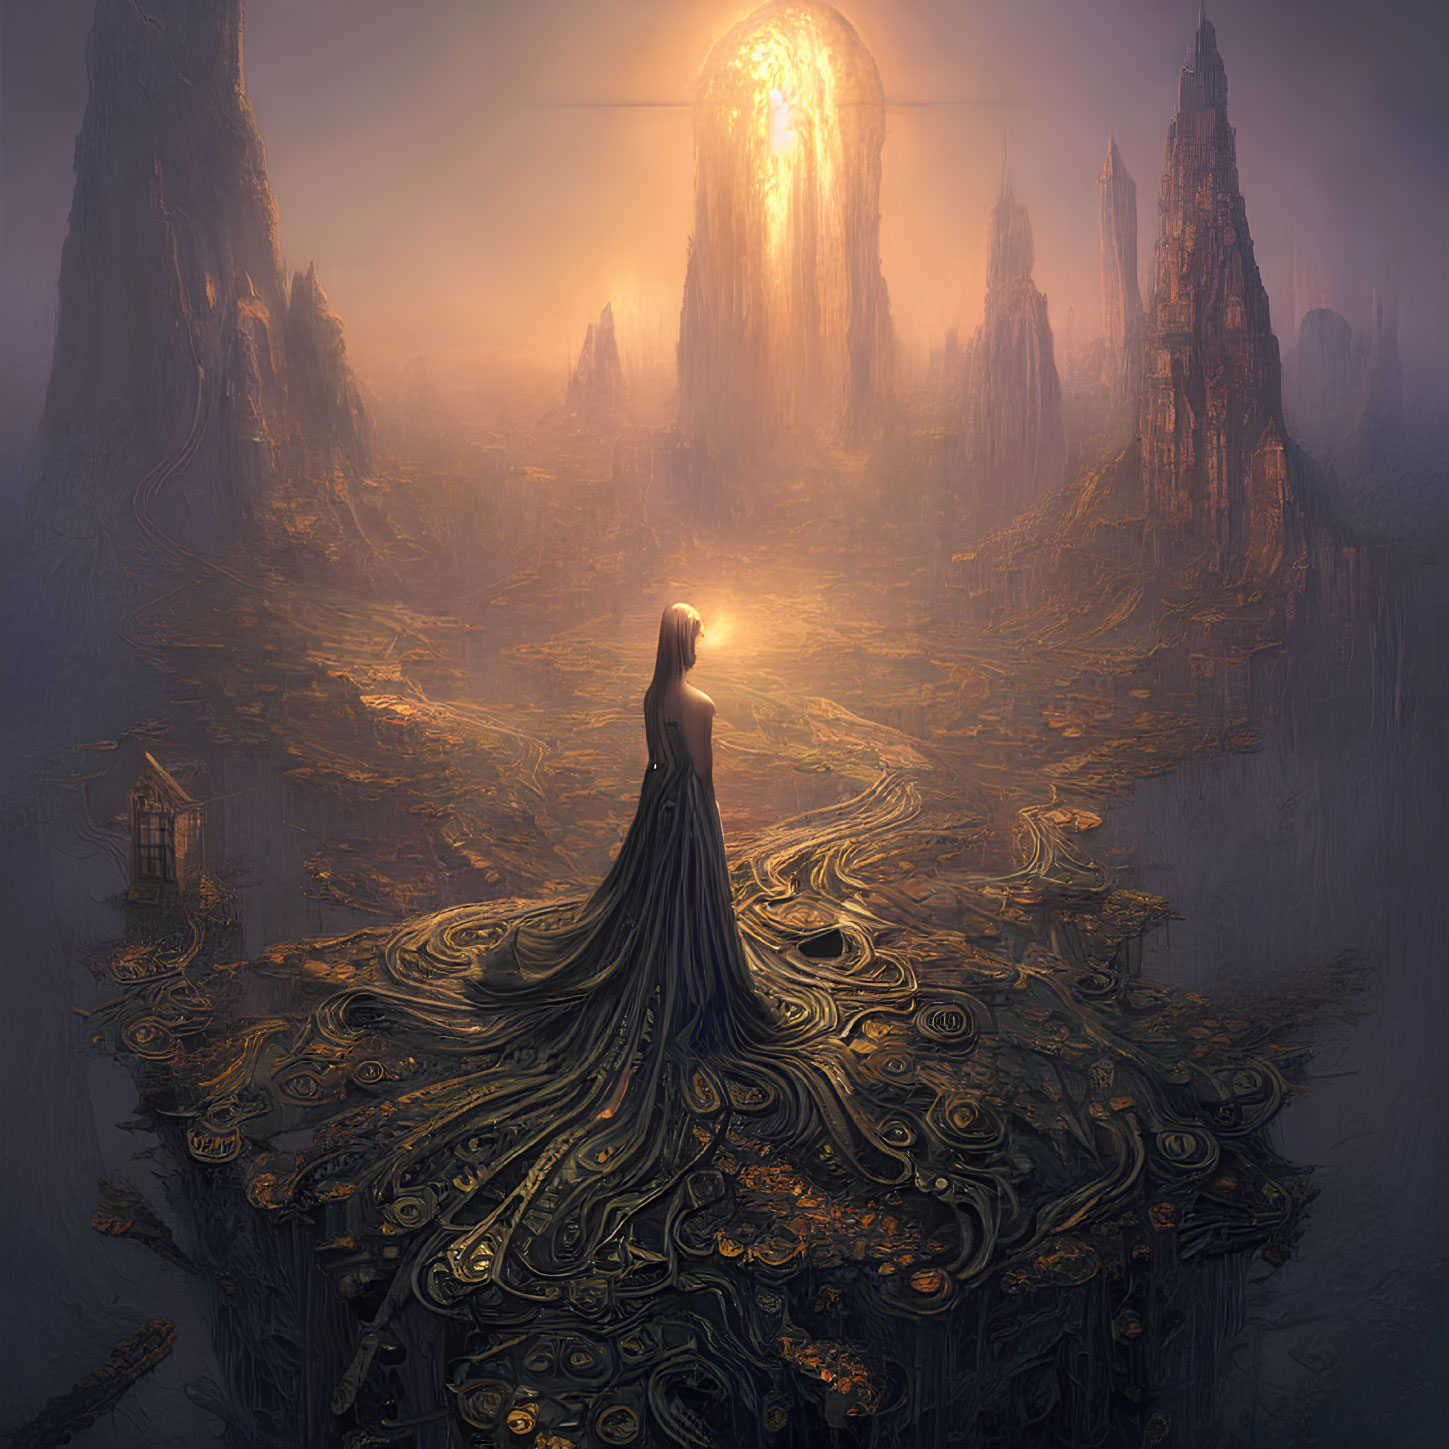 Mysterious Figure in Ethereal Landscape with Golden Spire